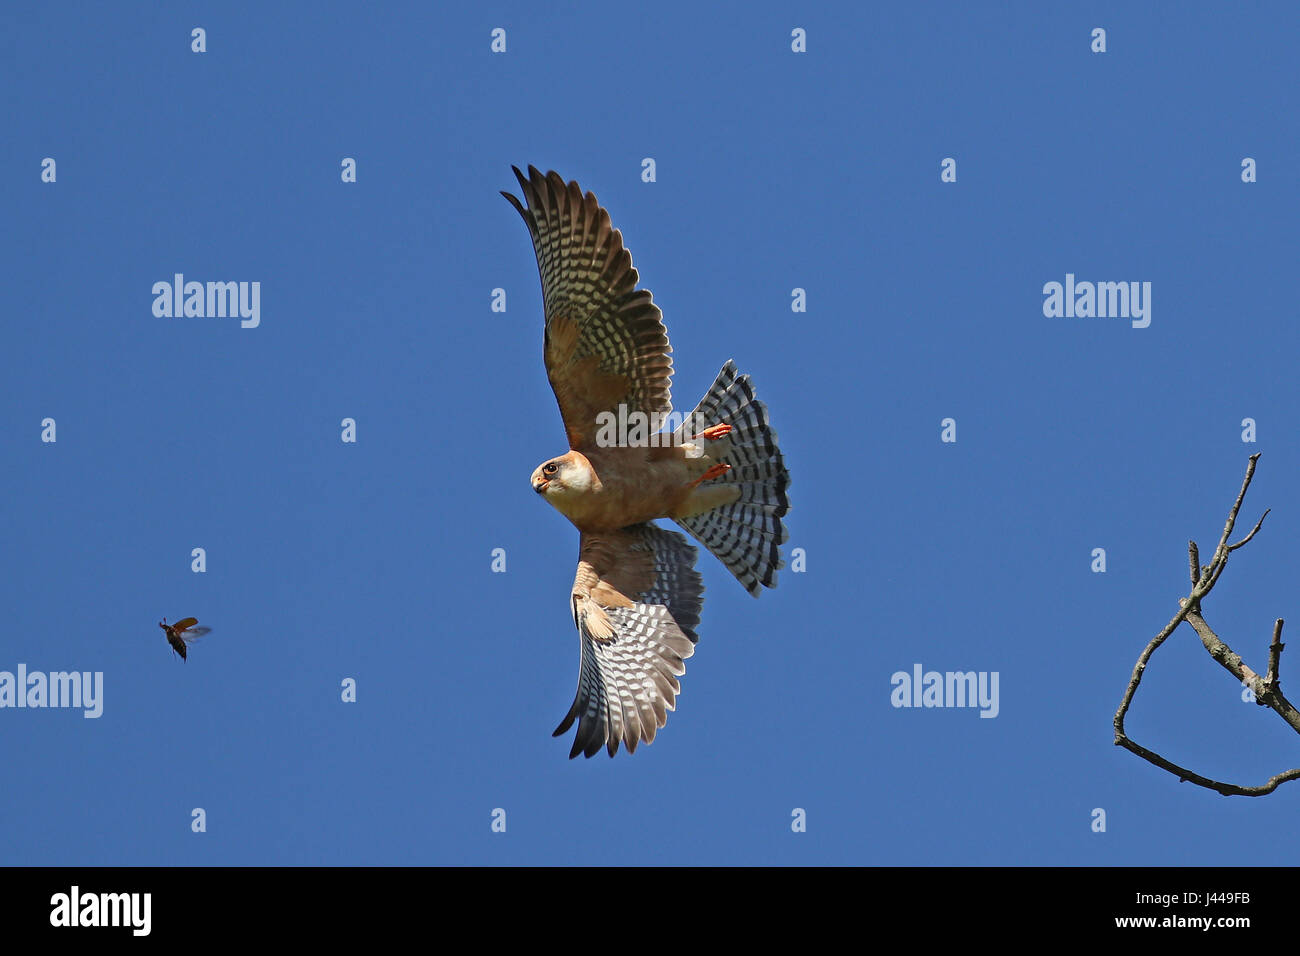 Female red-footed falcon, Falco Vespertinus, taking off from a tree branch to capture a large beetle in flight against blue skies Stock Photo